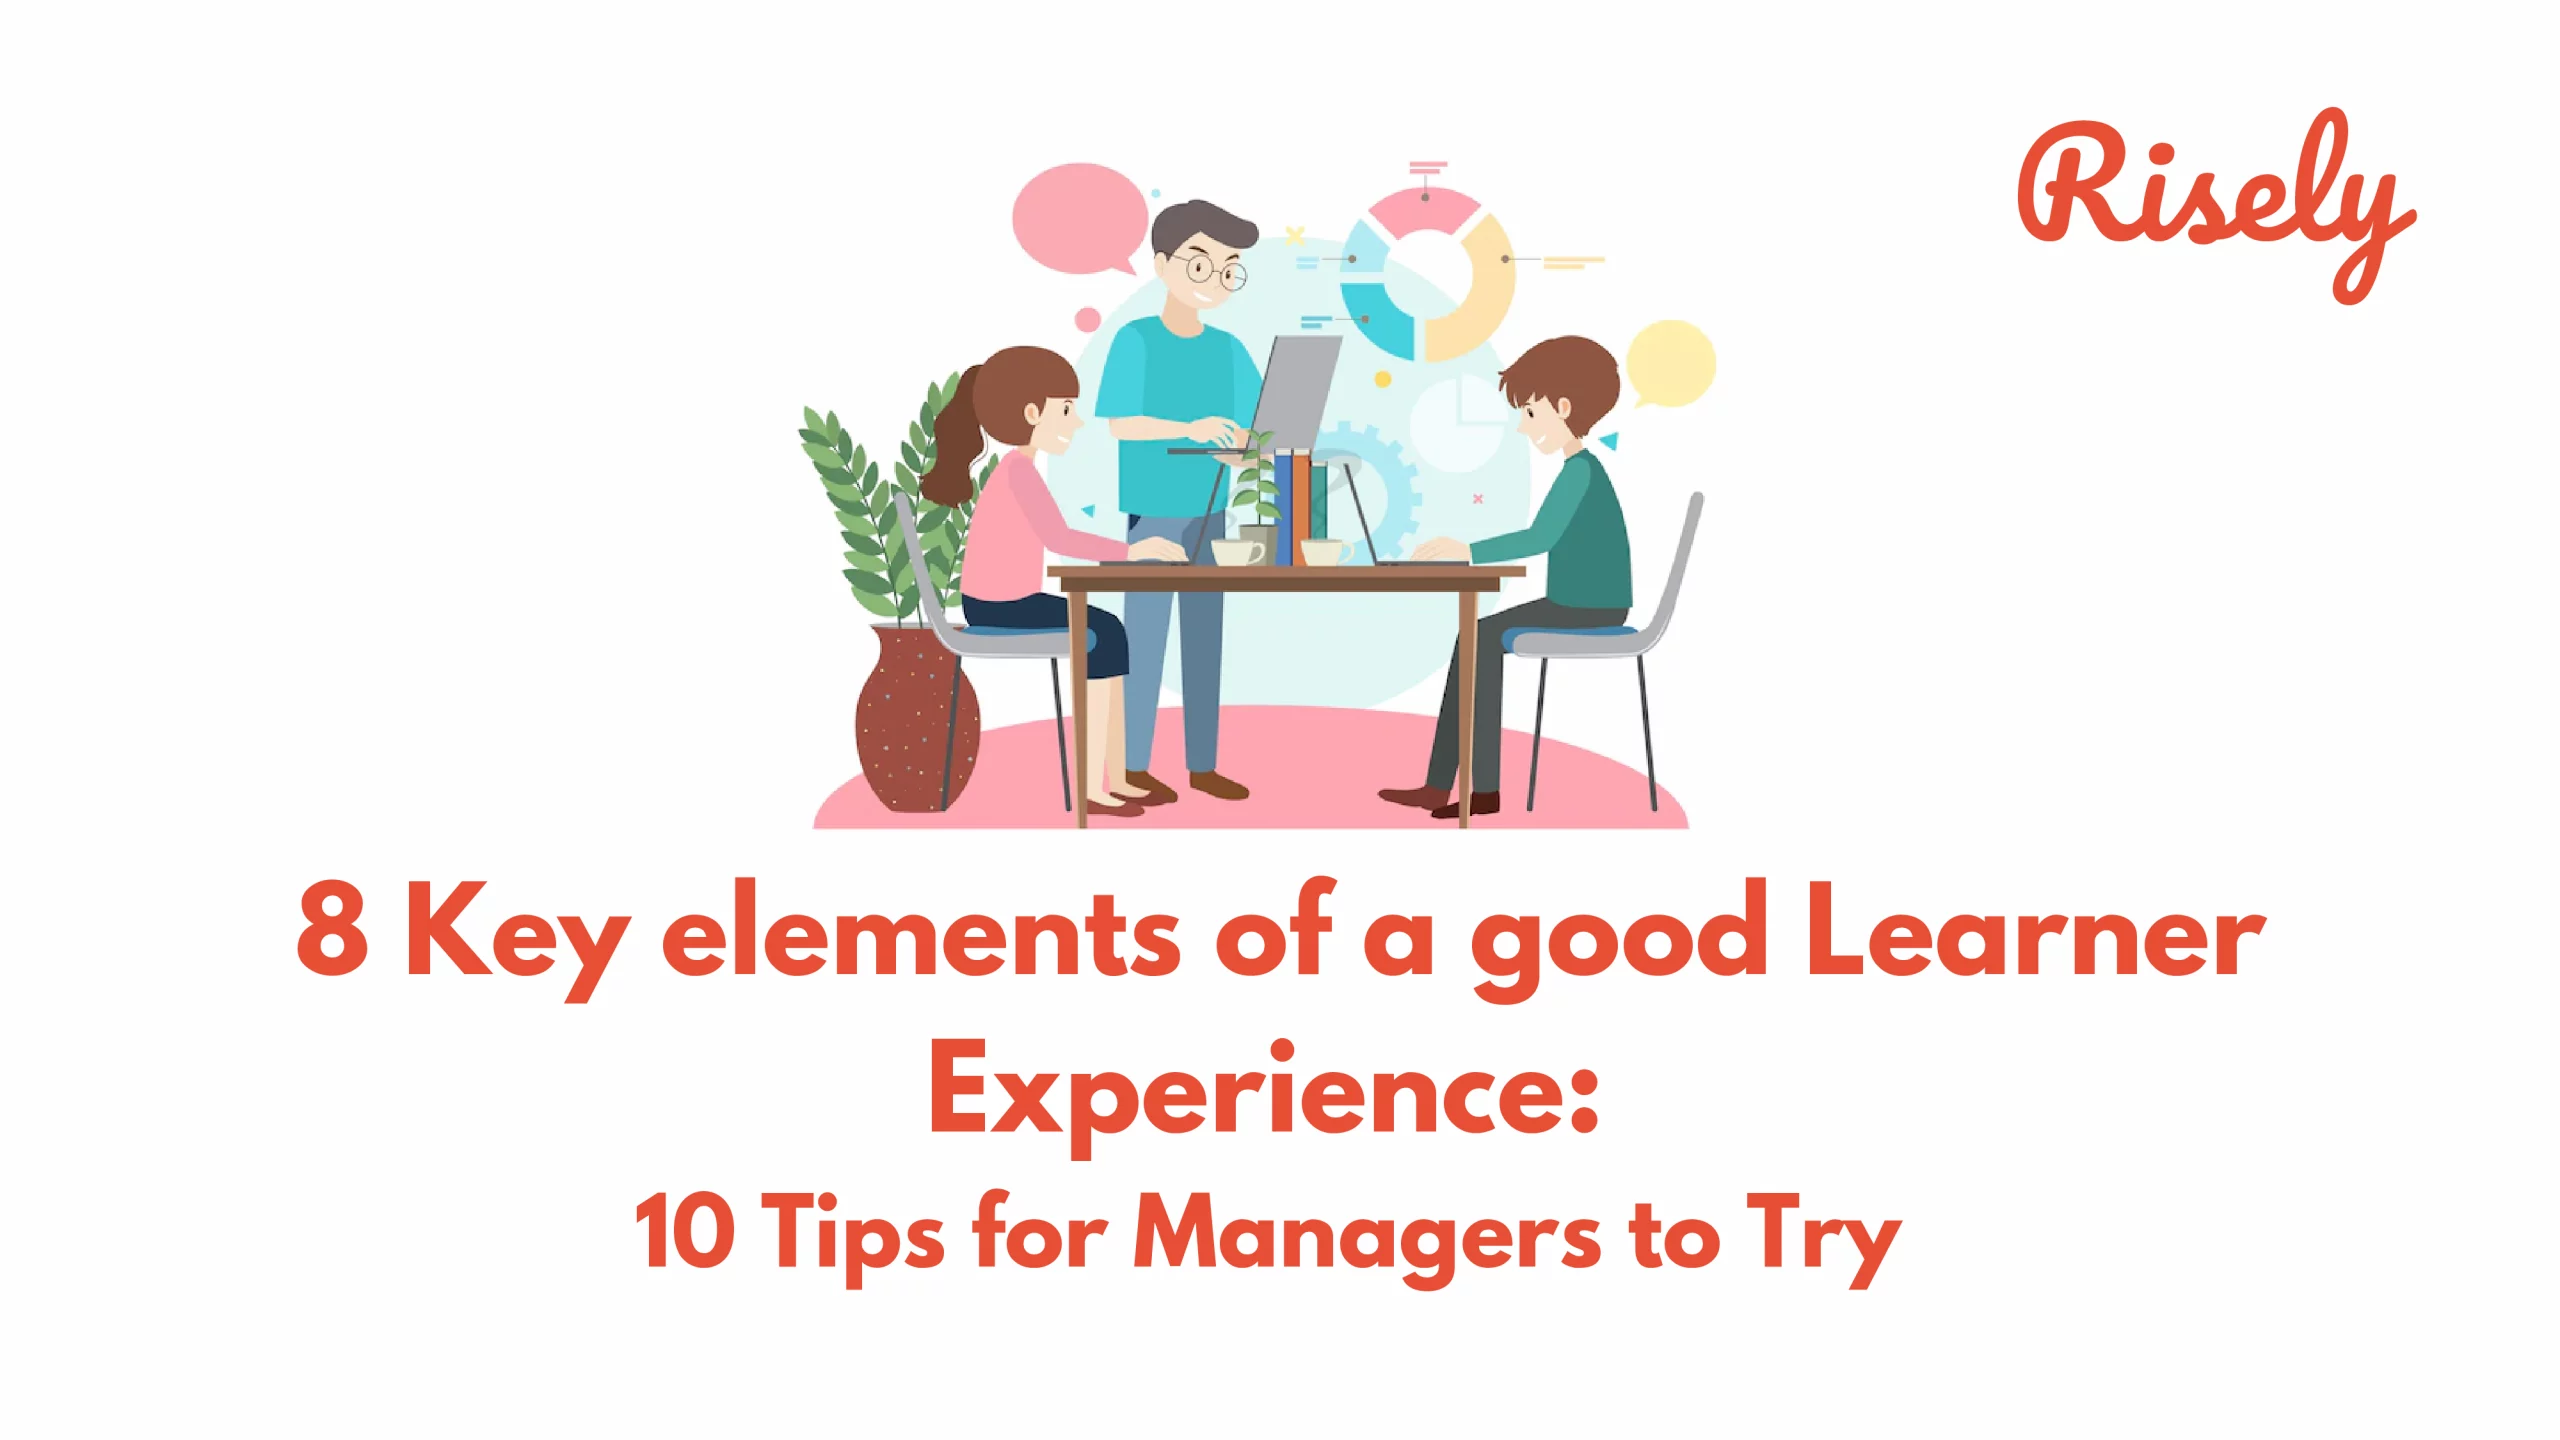 8 Key elements of a good Learner Experience: 10 Tips to Try for Managers